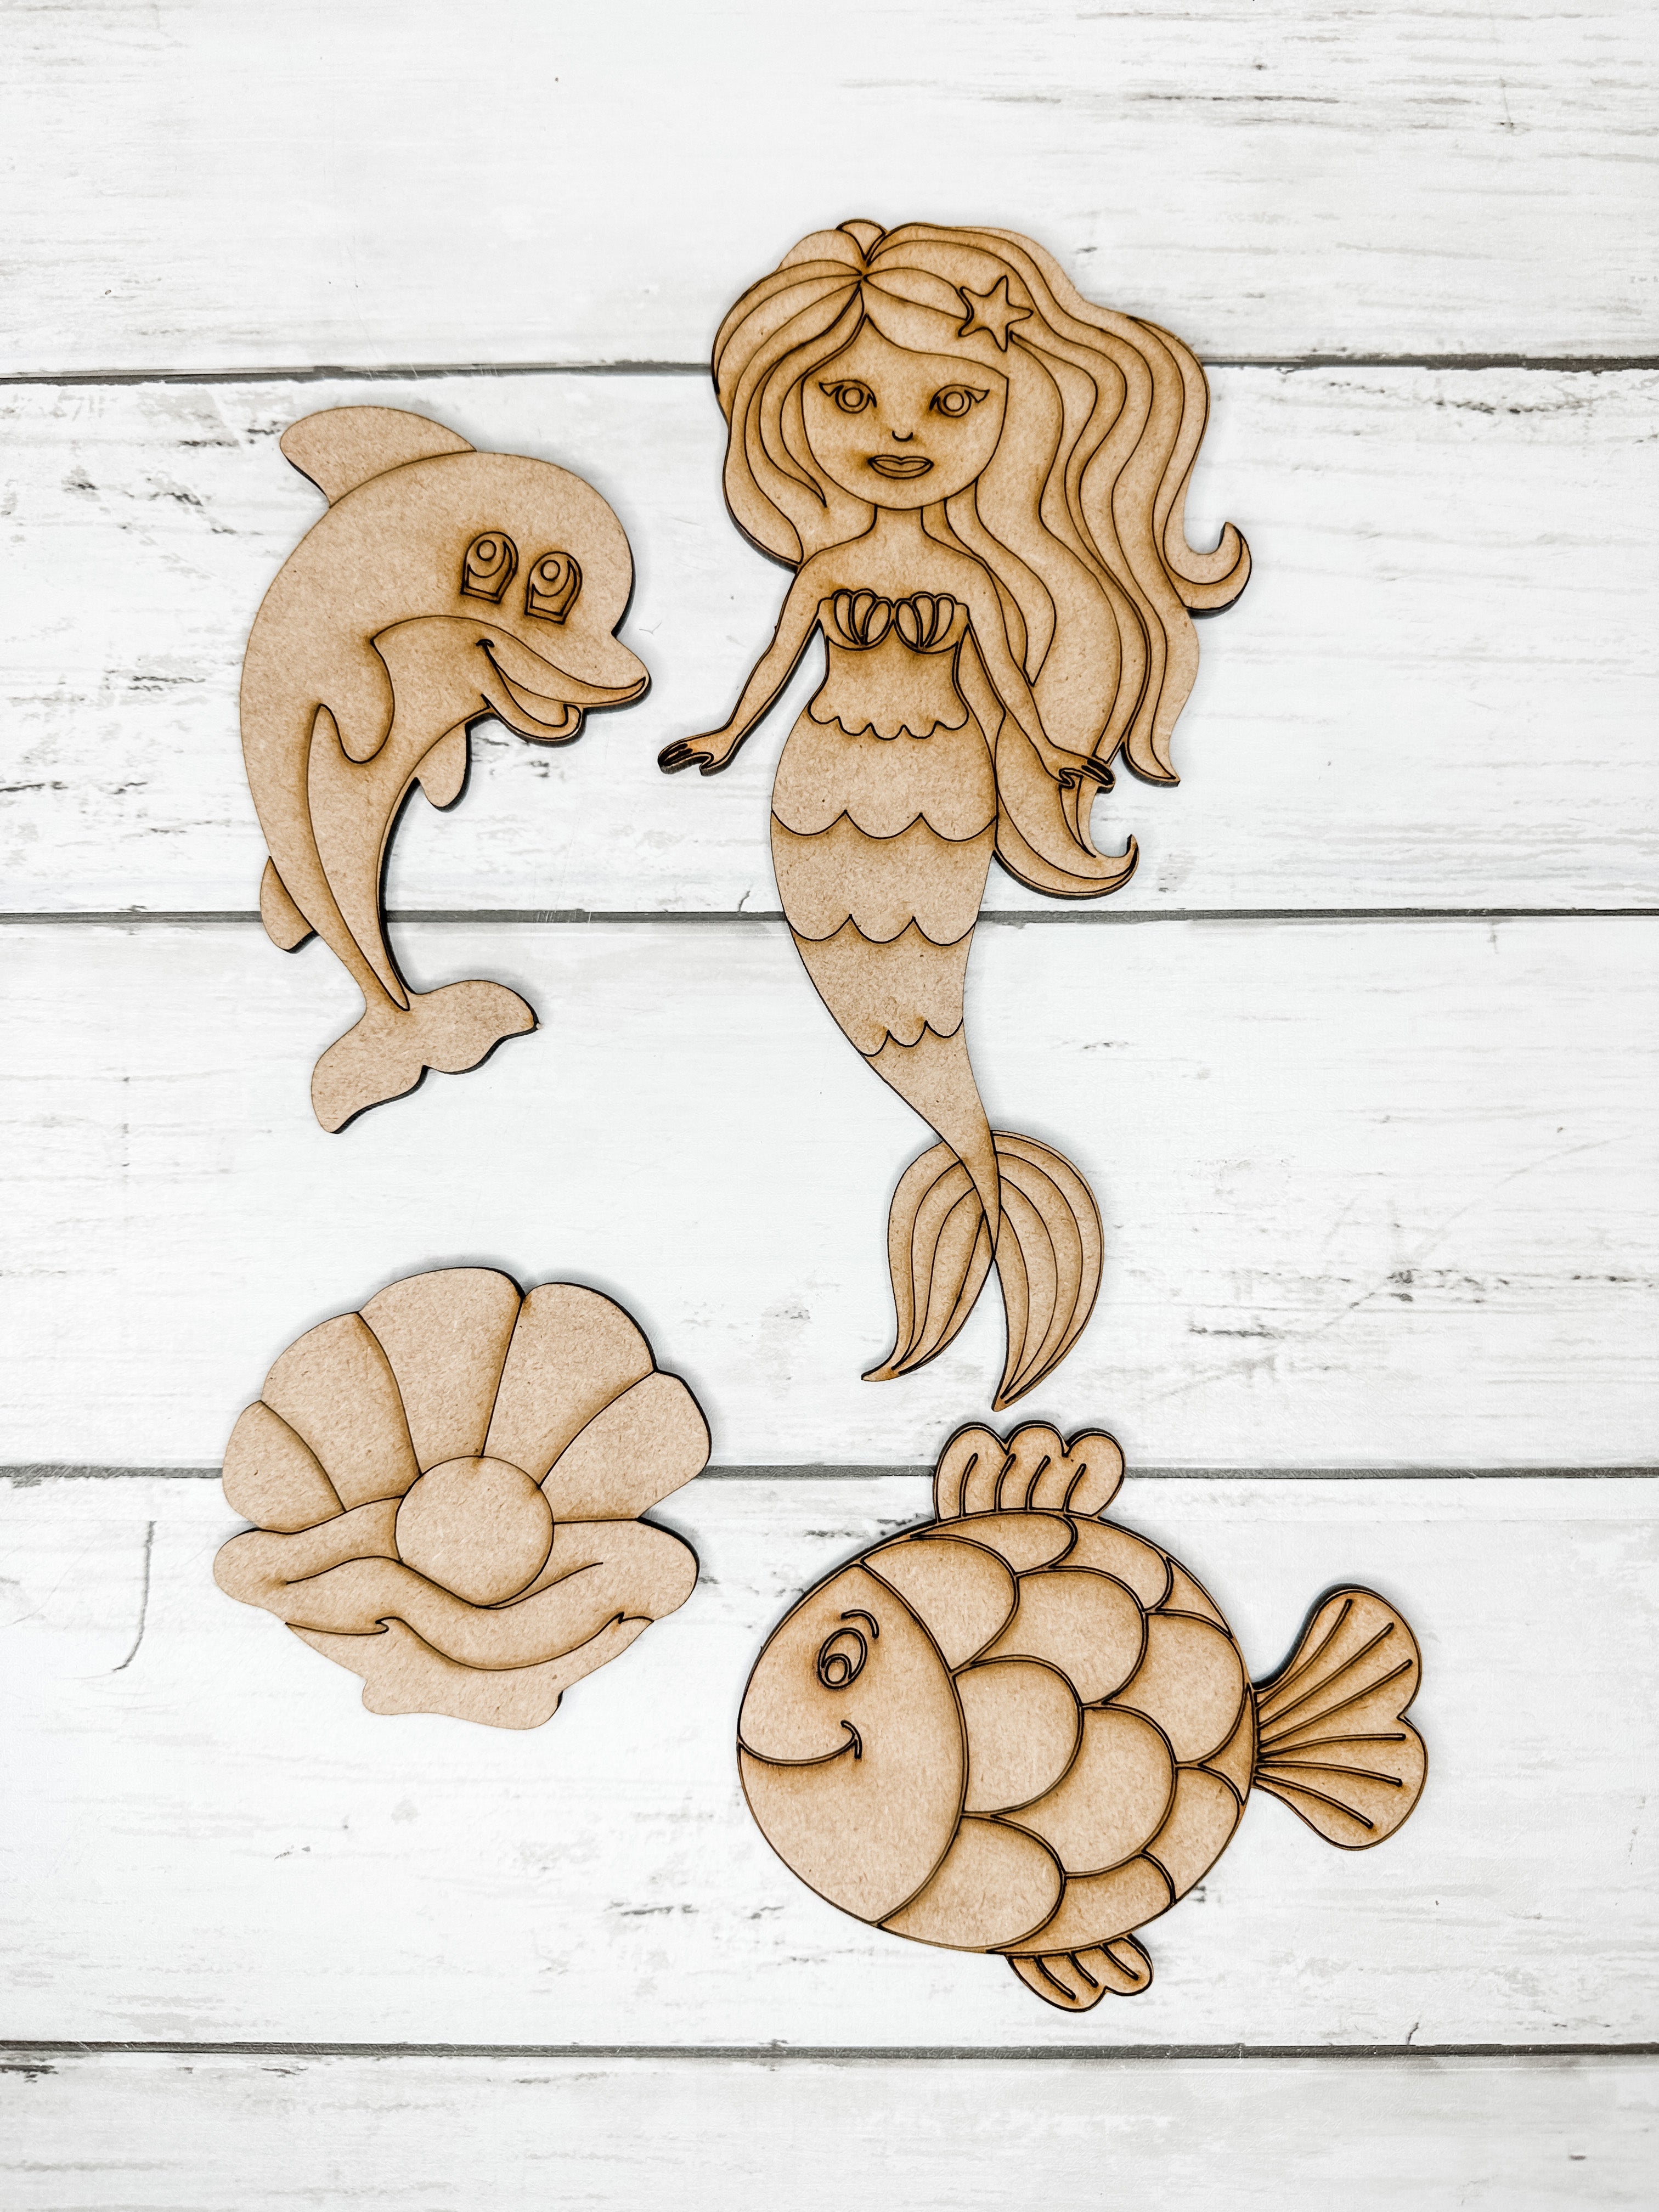 Mermaid Fish Kit Crafty Kids Adults – The Makers Map - DIY with Amber